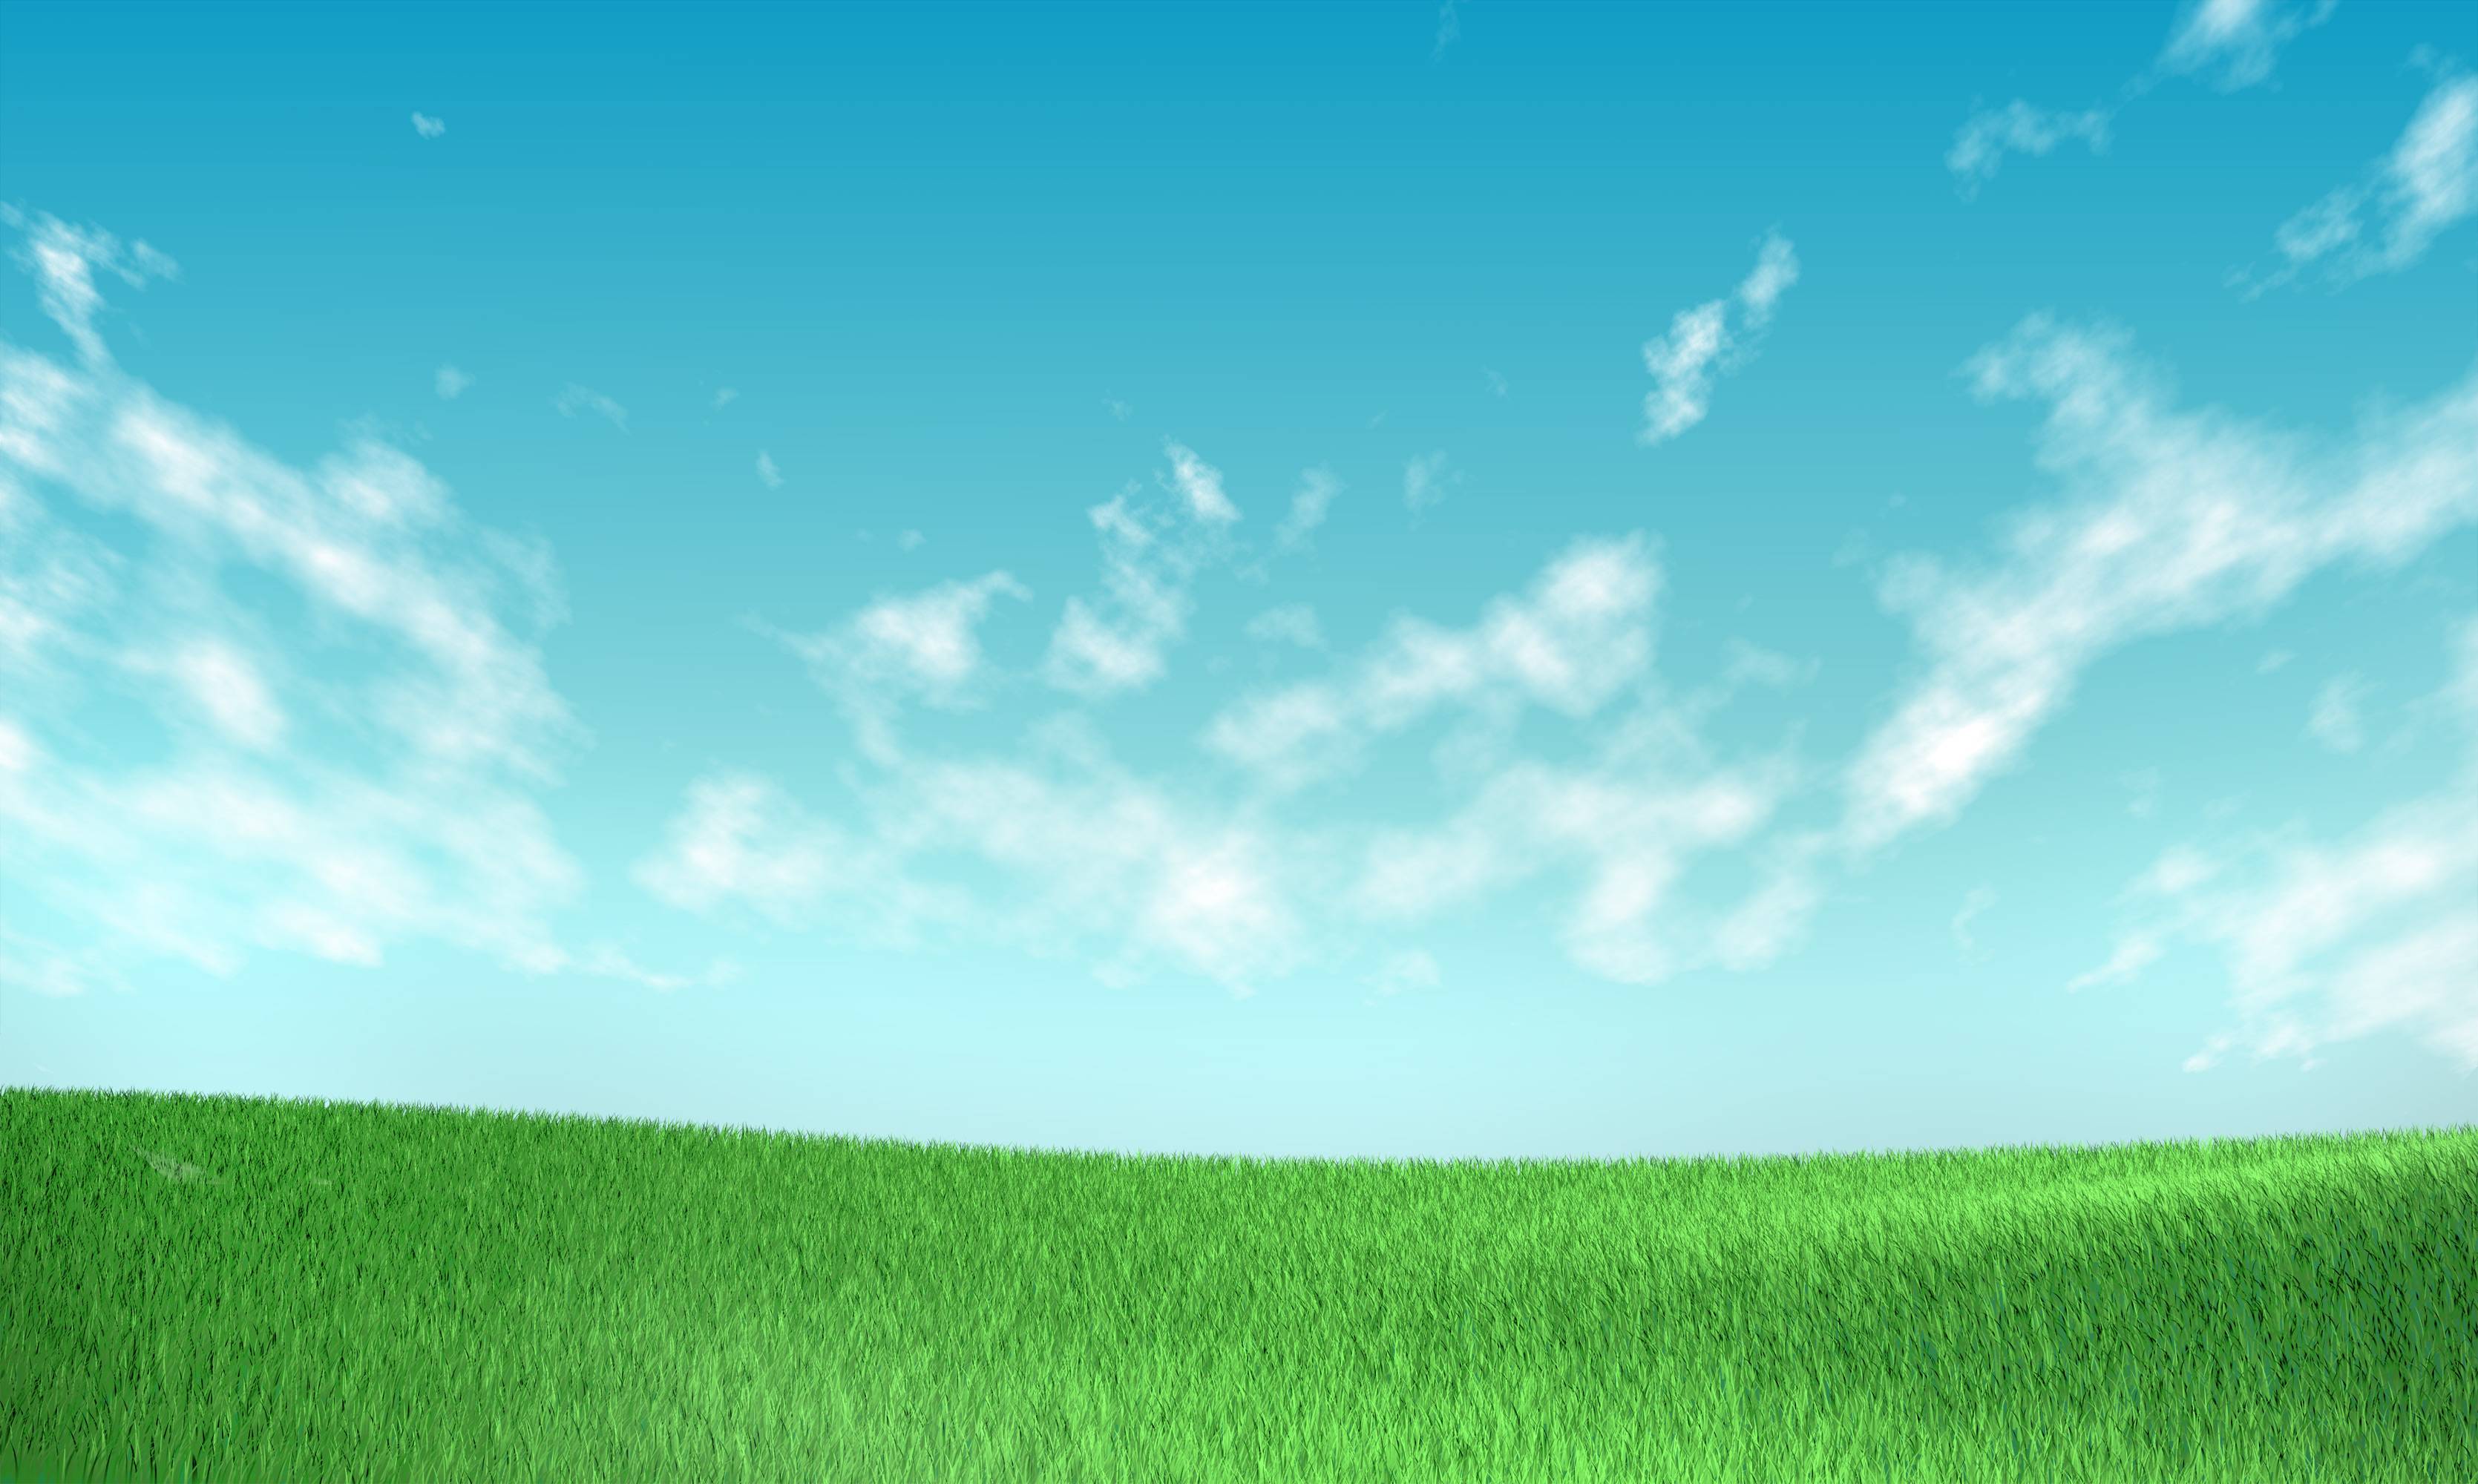 grass and sky background Wallpaper HD Image 10879